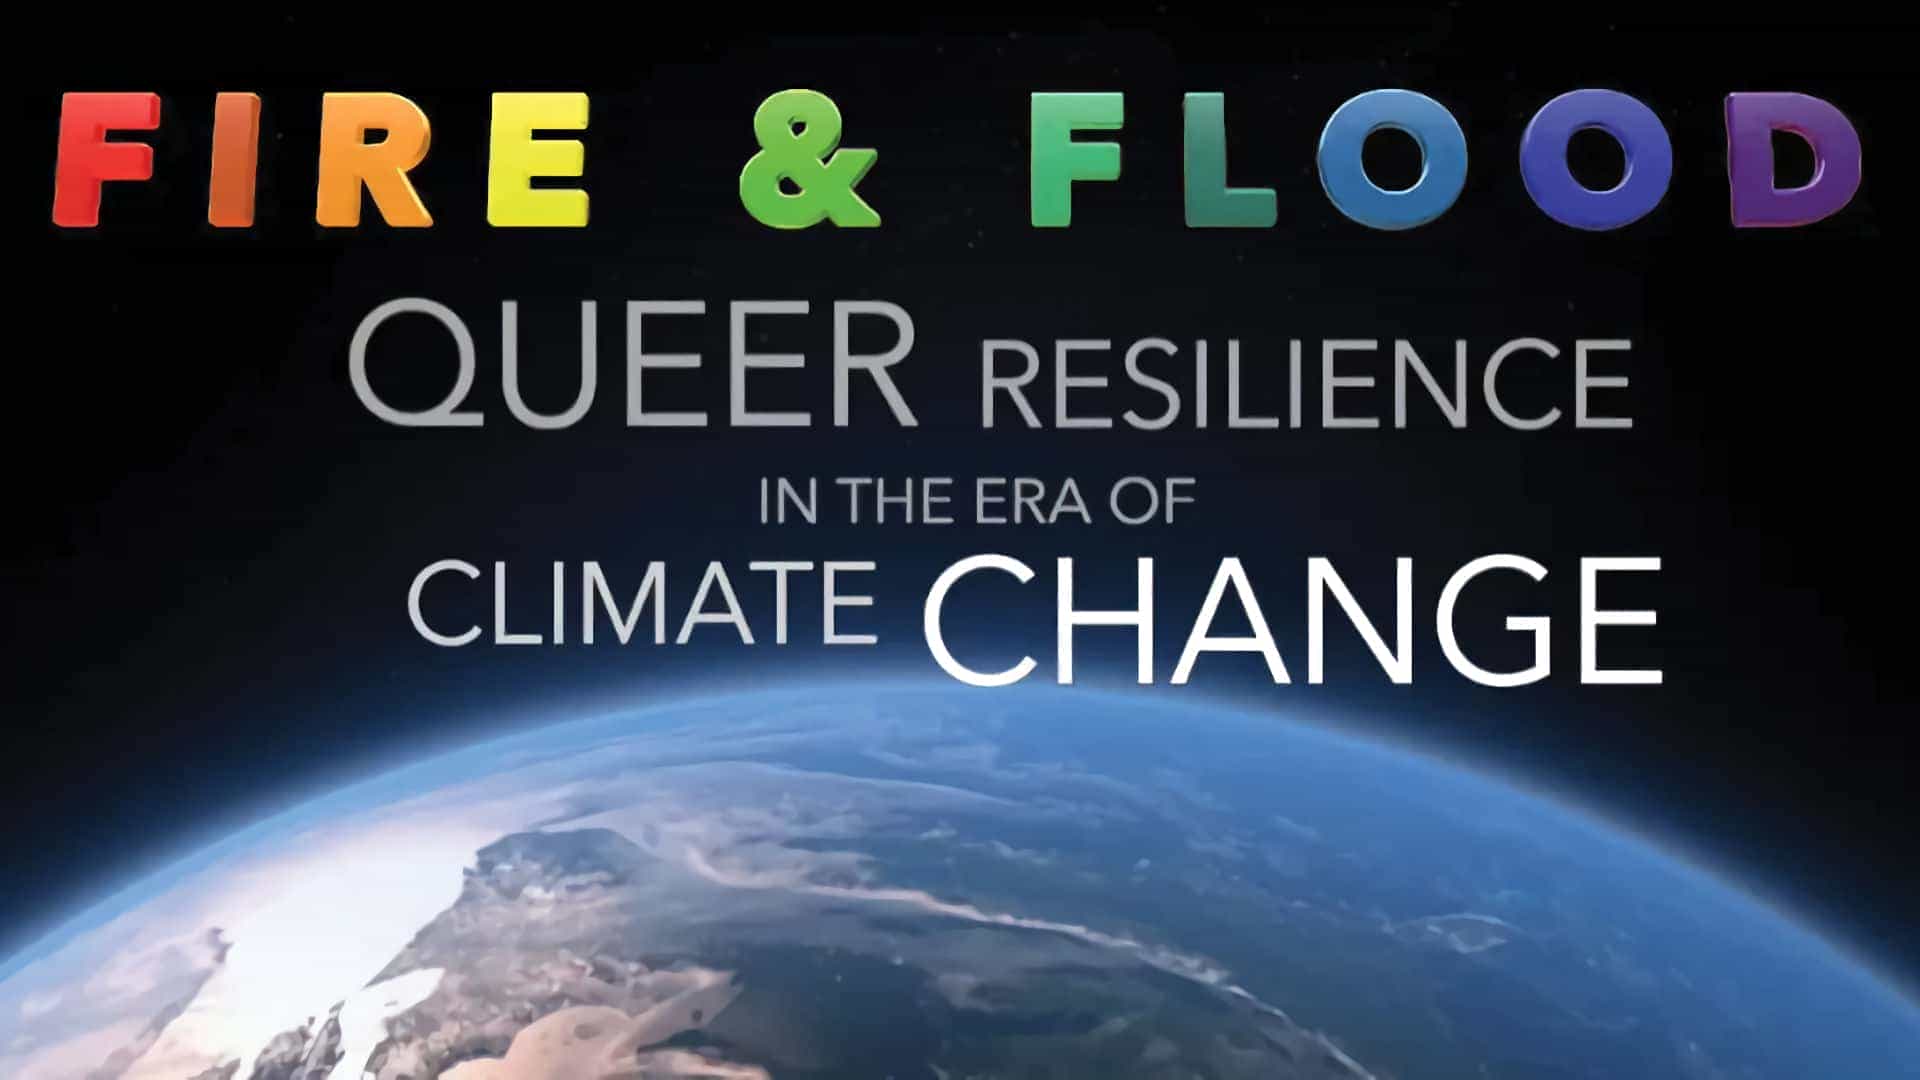 Fire & Flood - Queer Resilience In The Era of Climate Change